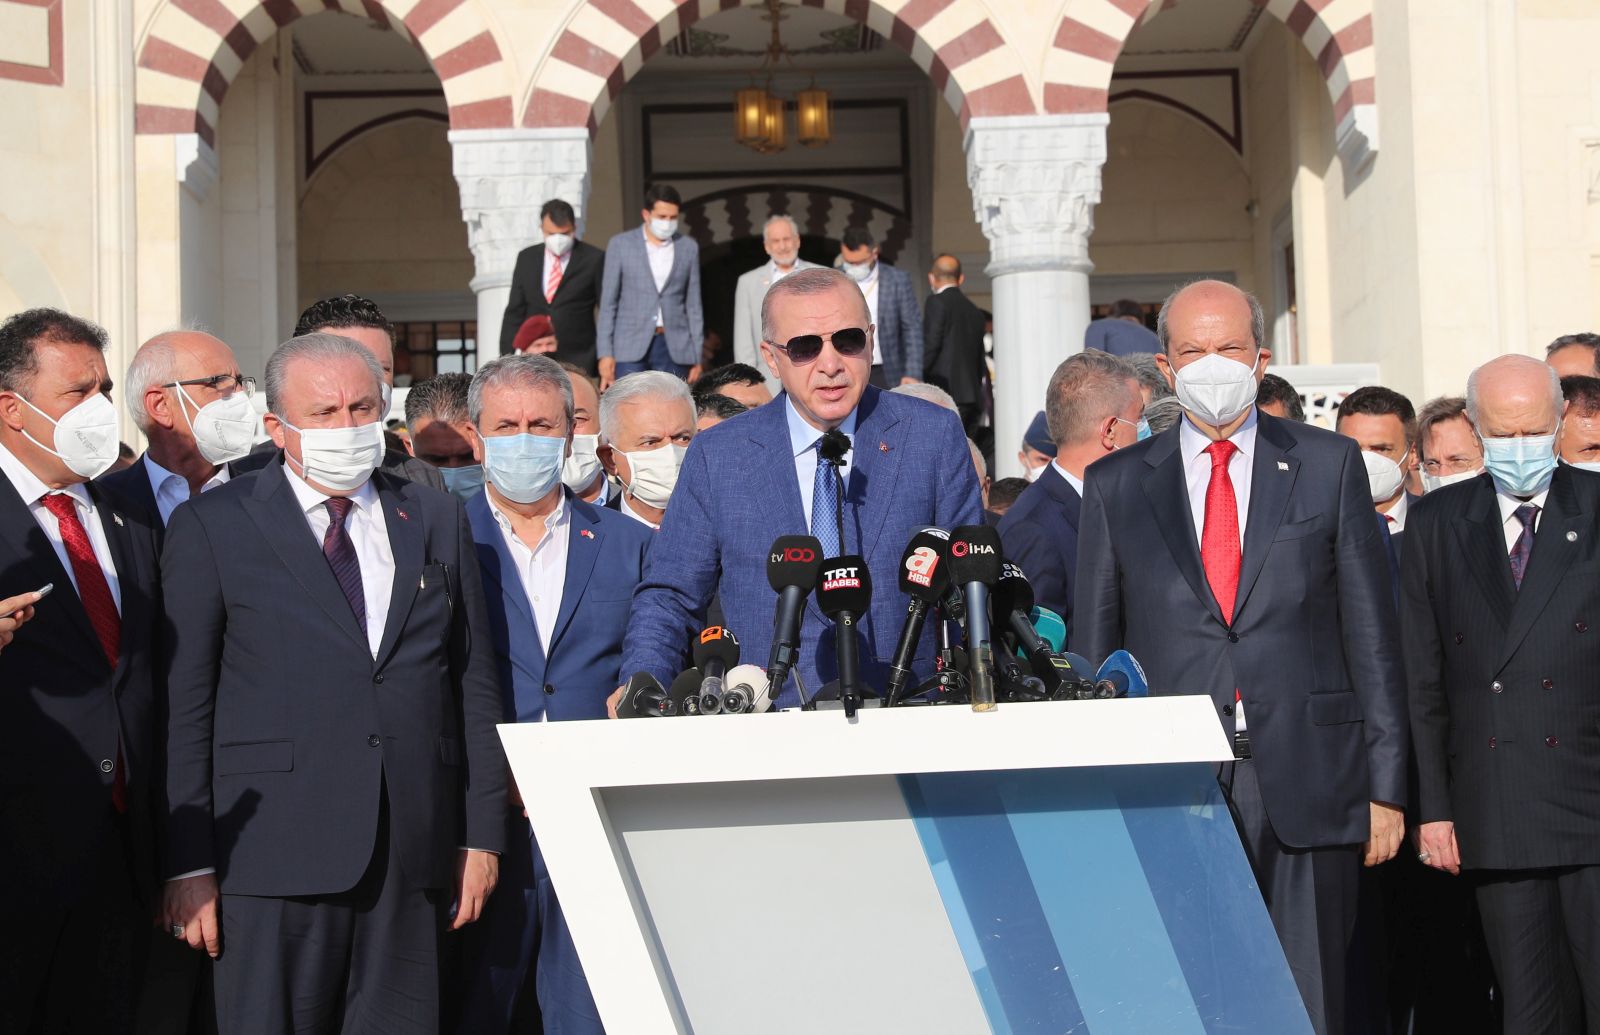 epa09354370 A handout picture provided by the Turkish President Press office shows Turkish President Recep Tayyip Erdogan (C) speaks with Turkish Cypriots President Ersin Tatar (C-R) after the Eid al-Adha prayers at the Hala Sultan Mosque in the Turkish-administered northern part of the divided capital Nicosia, Cyprus, 20 July 2021. Erdogan is in Northern Cyprus for celebrations of the 47th anniversary of the Turkey’s Peace Operation in Cyprus.  EPA/TURKISH PRESIDENT PRESS OFFICE HANDOUT HANDOUT  HANDOUT EDITORIAL USE ONLY/NO SALES